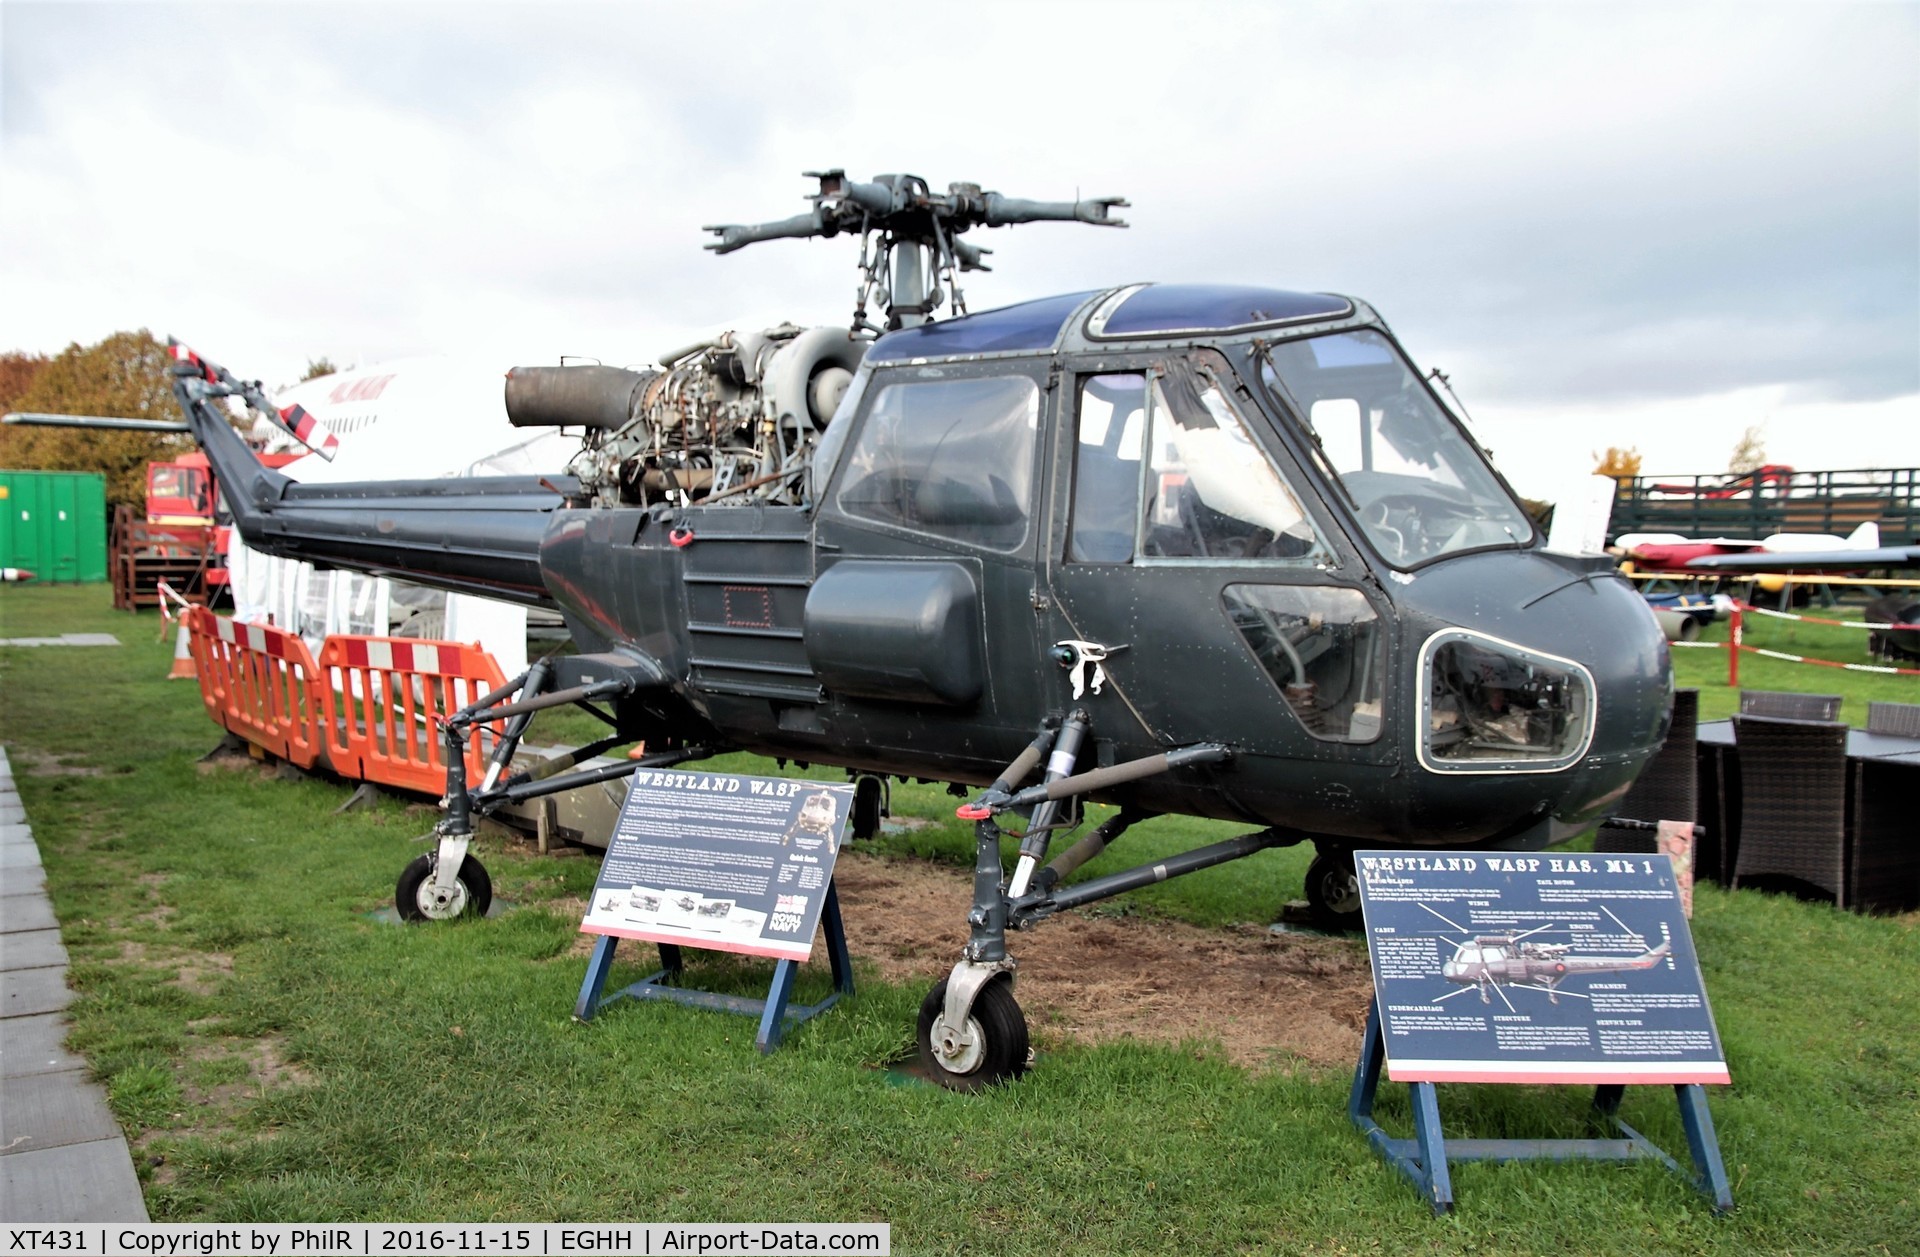 XT431, 1965 Westland Wasp HAS.1 C/N F9601, Exhibited at the Bournemouth Aviation Museum